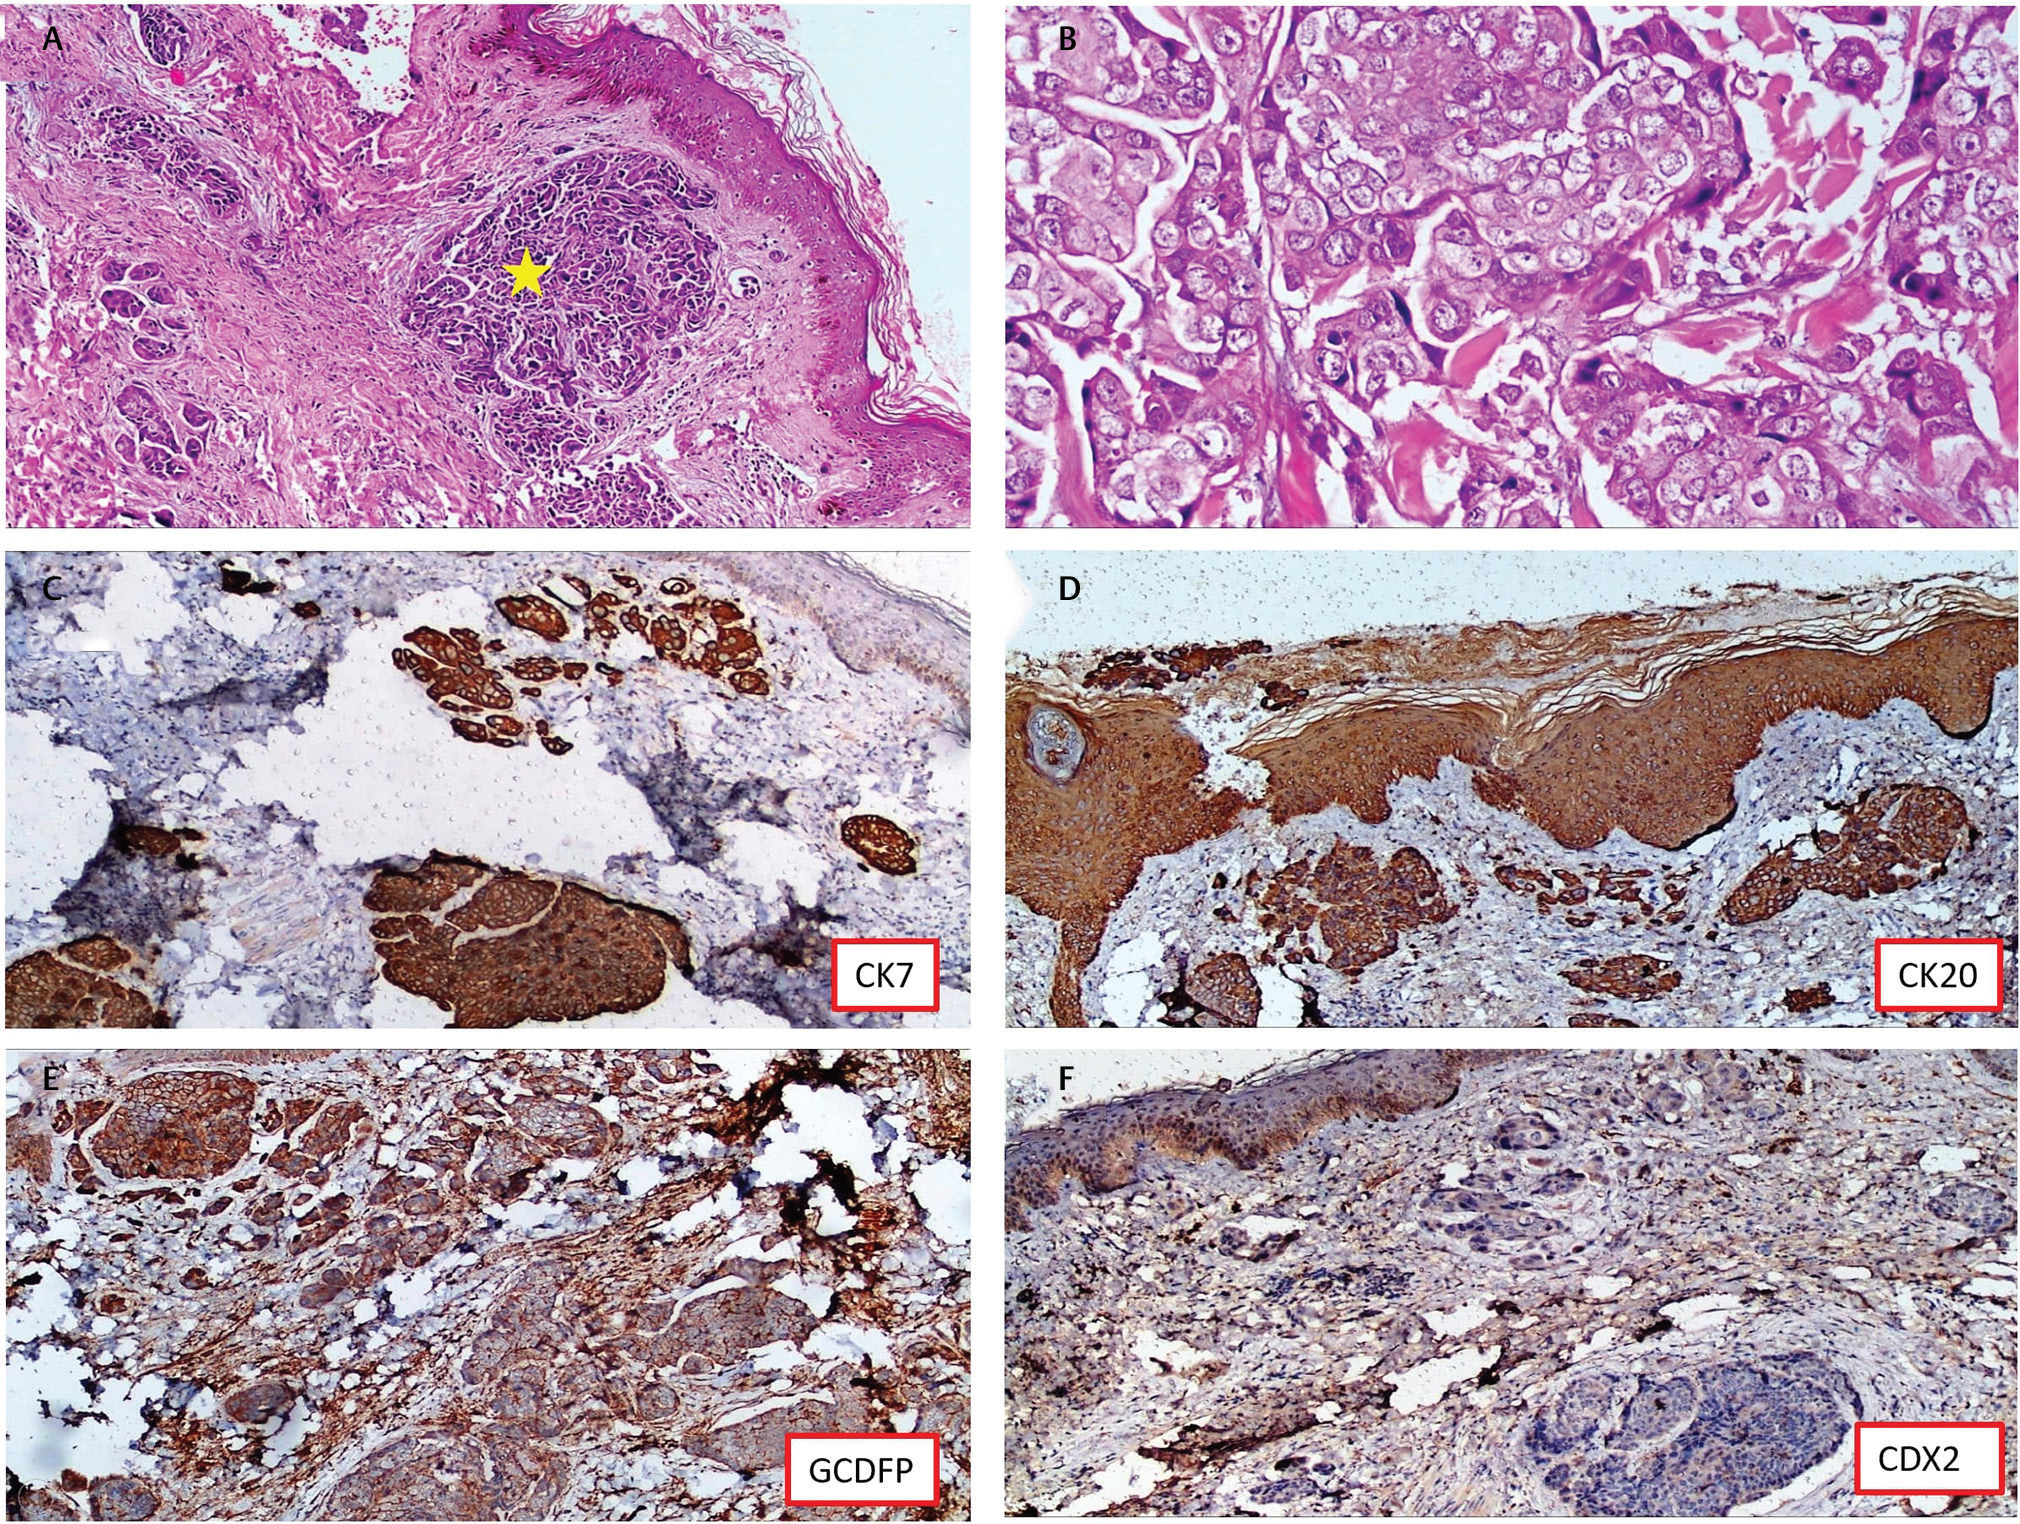 Fig. 2 (A) Dermis shows presence of numerous nests of atypical cells in a fibrocollagenous stroma (yellow star; hematoxylin & eosin [H&E] 100×). (B) Cells are large with high nuclear cytoplasmic ratio, pleomorphic nuclei with prominent nucleoli. No necrosis/mitosis is noted (H&E 400×). (C) Immunohistochemistry (IHC) CK7 (100×). (D) IHC CK20 (100×). (E) IHC GCDFP (100×). (F) IHC CDX2 (100×).